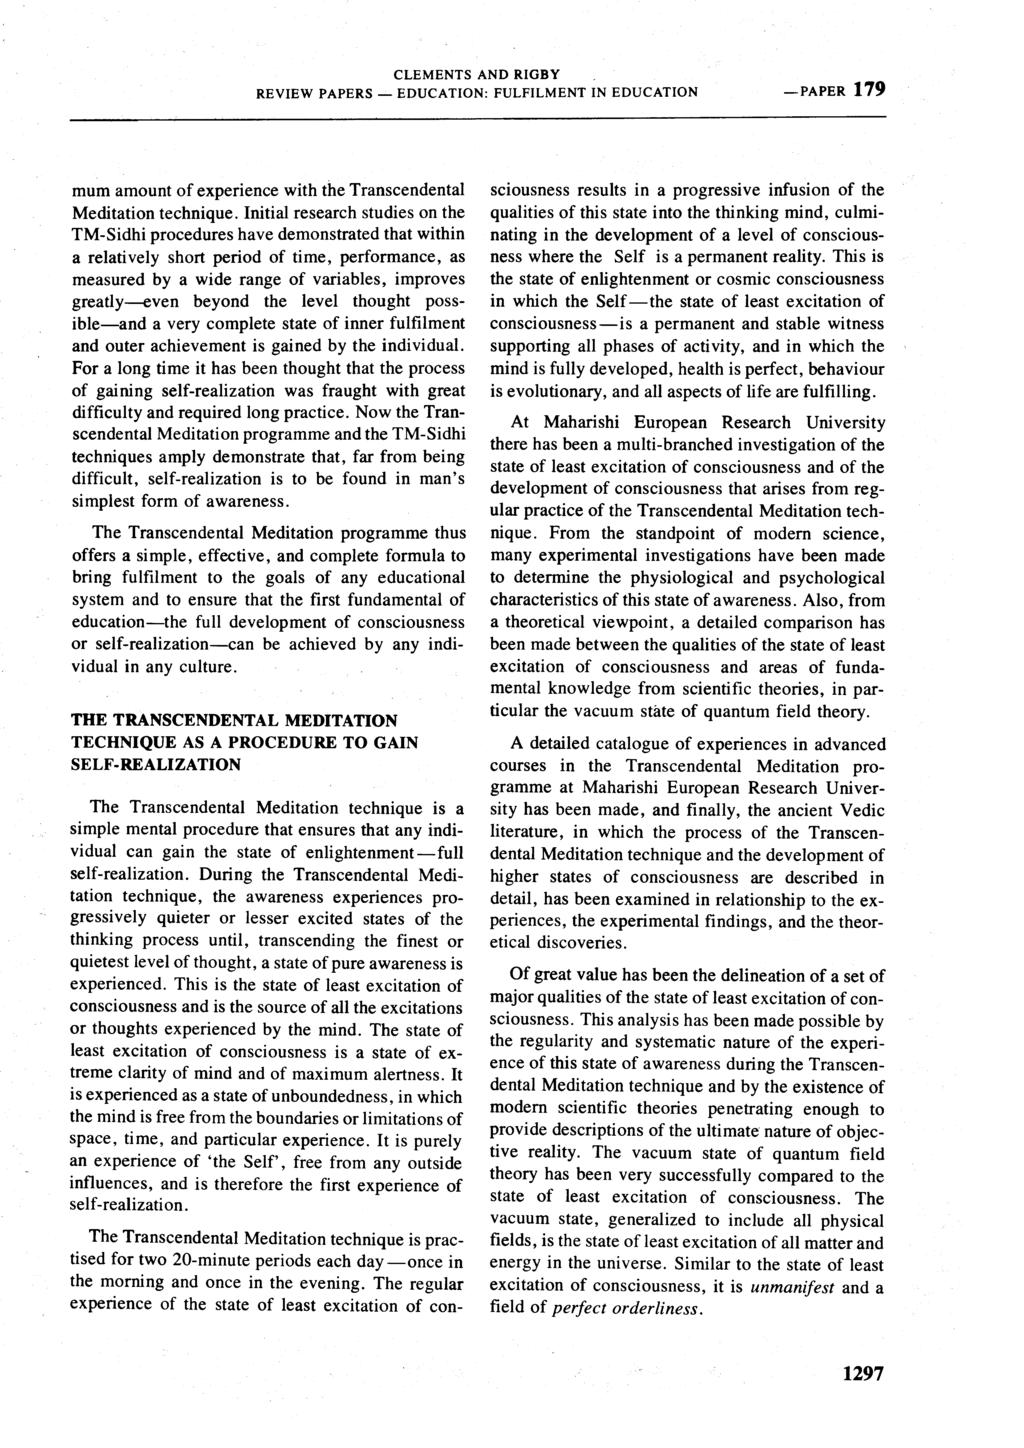 CLEMENTS AND RIGBY REVIEW PAPERS- EDUCATION: FULFILMENT IN EDUCATION -PAPER 179 mum amount of experience with the Transcendental Meditation technique.